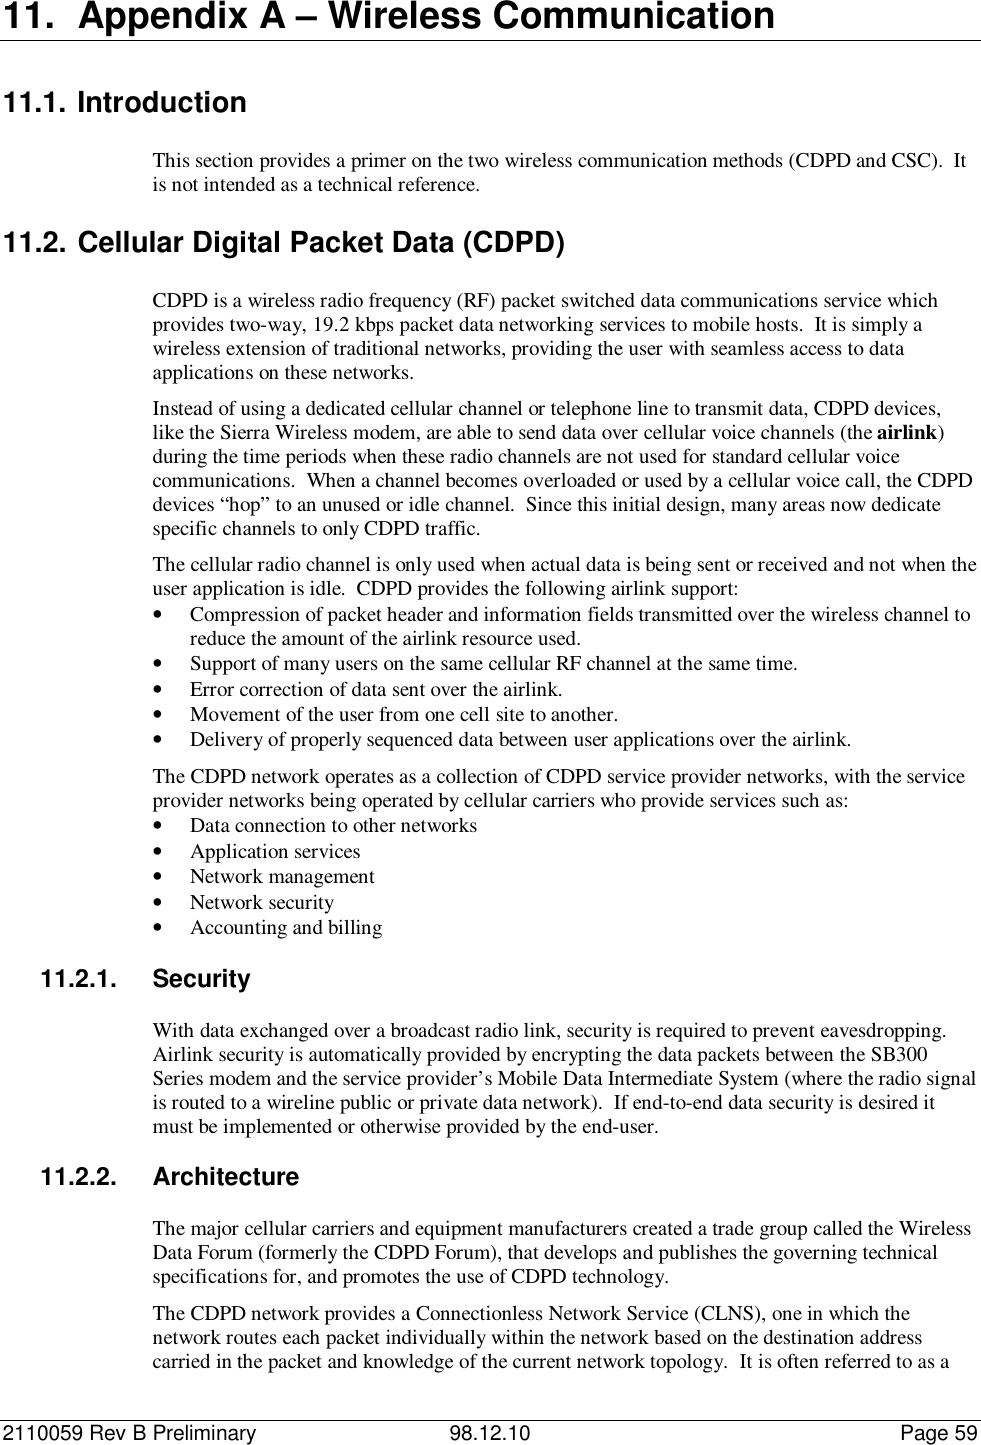 2110059 Rev B Preliminary 98.12.10 Page 5911.  Appendix A – Wireless Communication11.1. IntroductionThis section provides a primer on the two wireless communication methods (CDPD and CSC).  Itis not intended as a technical reference.11.2. Cellular Digital Packet Data (CDPD)CDPD is a wireless radio frequency (RF) packet switched data communications service whichprovides two-way, 19.2 kbps packet data networking services to mobile hosts.  It is simply awireless extension of traditional networks, providing the user with seamless access to dataapplications on these networks.Instead of using a dedicated cellular channel or telephone line to transmit data, CDPD devices,like the Sierra Wireless modem, are able to send data over cellular voice channels (the airlink)during the time periods when these radio channels are not used for standard cellular voicecommunications.  When a channel becomes overloaded or used by a cellular voice call, the CDPDdevices “hop” to an unused or idle channel.  Since this initial design, many areas now dedicatespecific channels to only CDPD traffic.The cellular radio channel is only used when actual data is being sent or received and not when theuser application is idle.  CDPD provides the following airlink support:• Compression of packet header and information fields transmitted over the wireless channel toreduce the amount of the airlink resource used.• Support of many users on the same cellular RF channel at the same time.• Error correction of data sent over the airlink.• Movement of the user from one cell site to another.• Delivery of properly sequenced data between user applications over the airlink.The CDPD network operates as a collection of CDPD service provider networks, with the serviceprovider networks being operated by cellular carriers who provide services such as:• Data connection to other networks• Application services• Network management• Network security• Accounting and billing11.2.1. SecurityWith data exchanged over a broadcast radio link, security is required to prevent eavesdropping.Airlink security is automatically provided by encrypting the data packets between the SB300Series modem and the service provider’s Mobile Data Intermediate System (where the radio signalis routed to a wireline public or private data network).  If end-to-end data security is desired itmust be implemented or otherwise provided by the end-user.11.2.2. ArchitectureThe major cellular carriers and equipment manufacturers created a trade group called the WirelessData Forum (formerly the CDPD Forum), that develops and publishes the governing technicalspecifications for, and promotes the use of CDPD technology.The CDPD network provides a Connectionless Network Service (CLNS), one in which thenetwork routes each packet individually within the network based on the destination addresscarried in the packet and knowledge of the current network topology.  It is often referred to as a